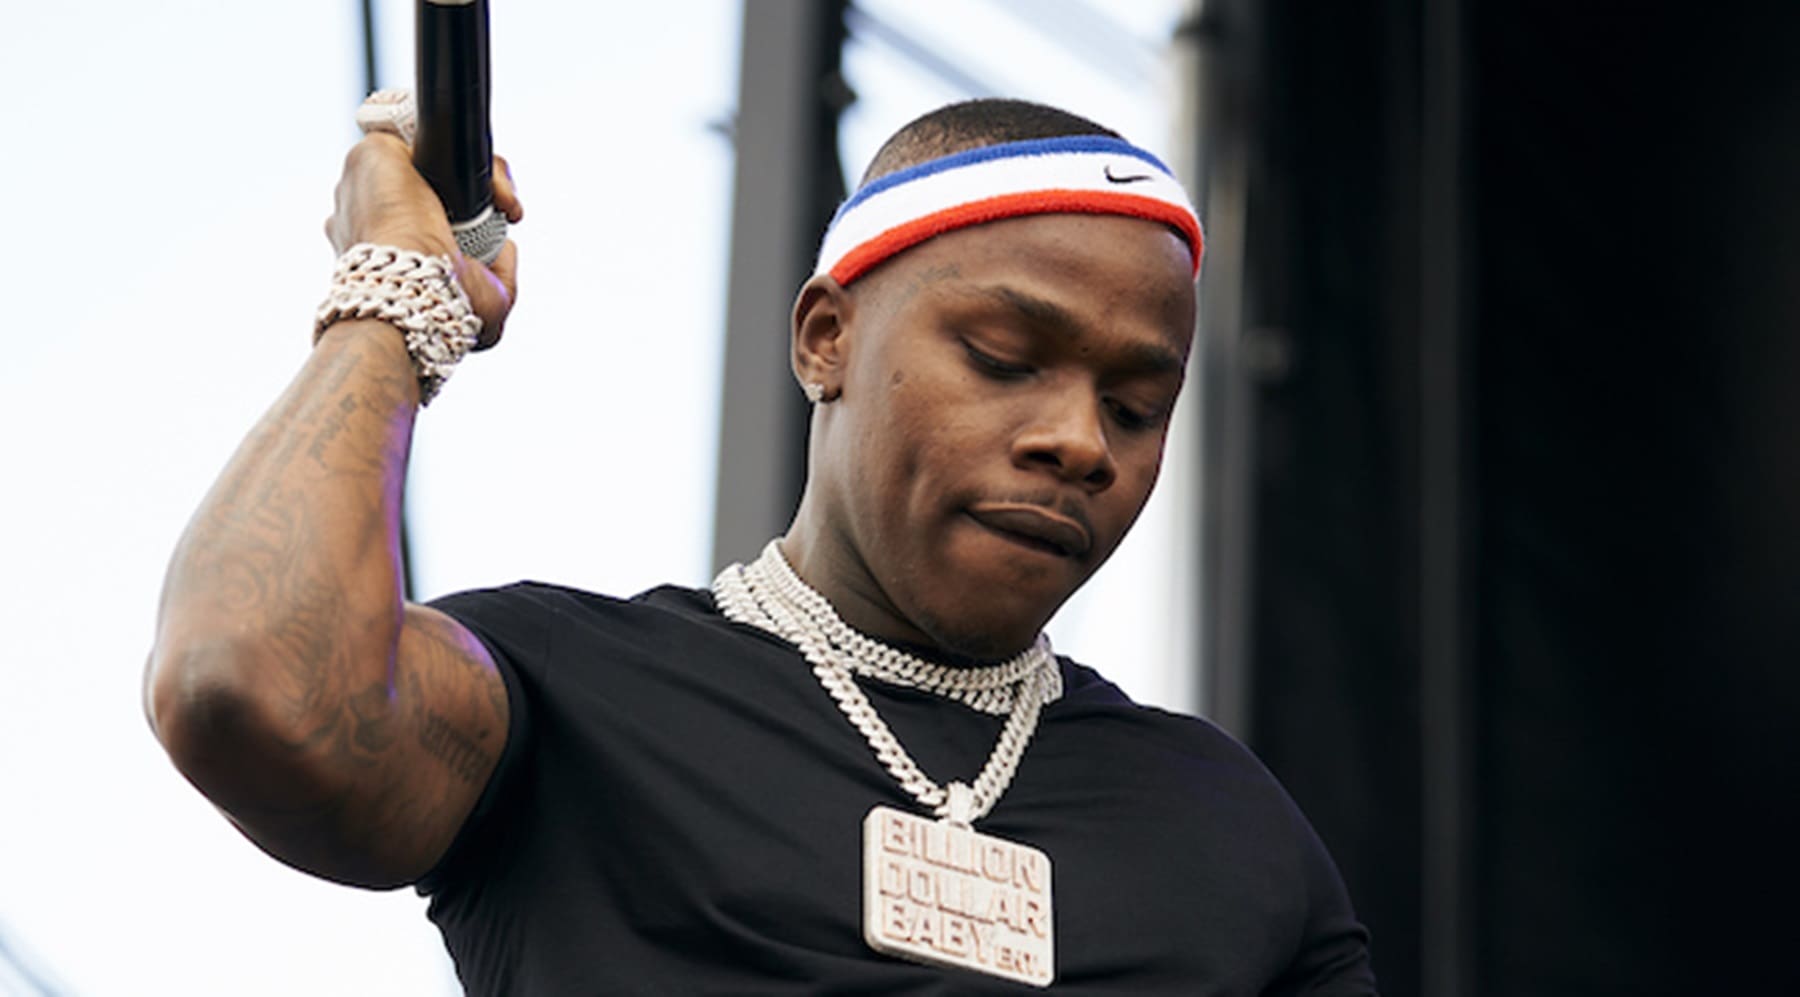 DaBaby Fender Bender Punches Fan